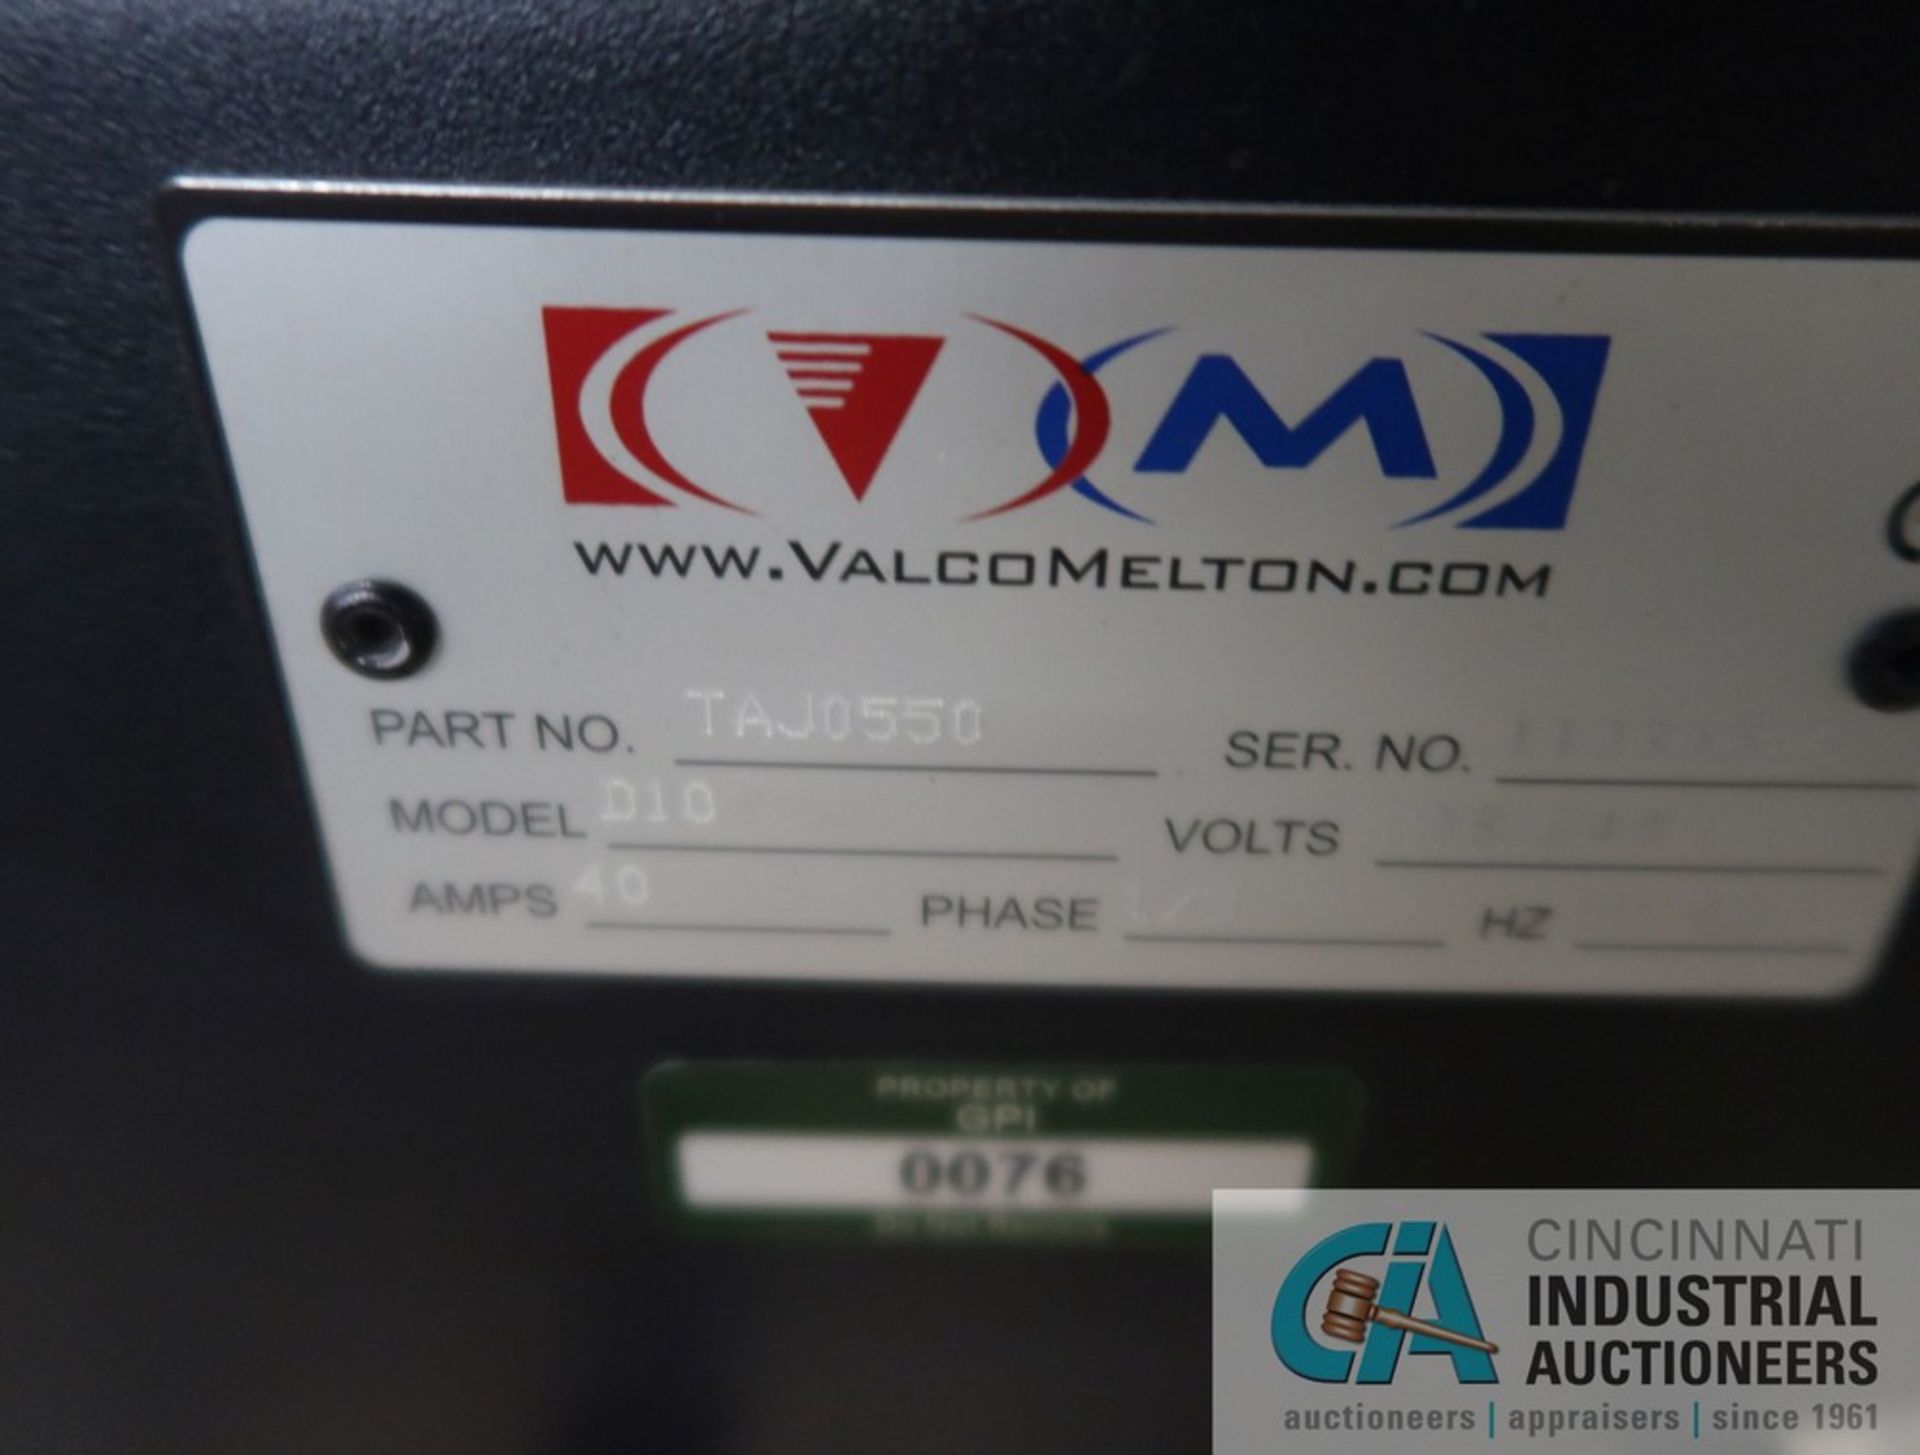 VALCO MELTON MODEL D10 D SERIES HOT MELT ADHESIVE SYSTEM; S/N 11030029, 1/3 PHASE, 208/240 VOLTS - Image 4 of 4